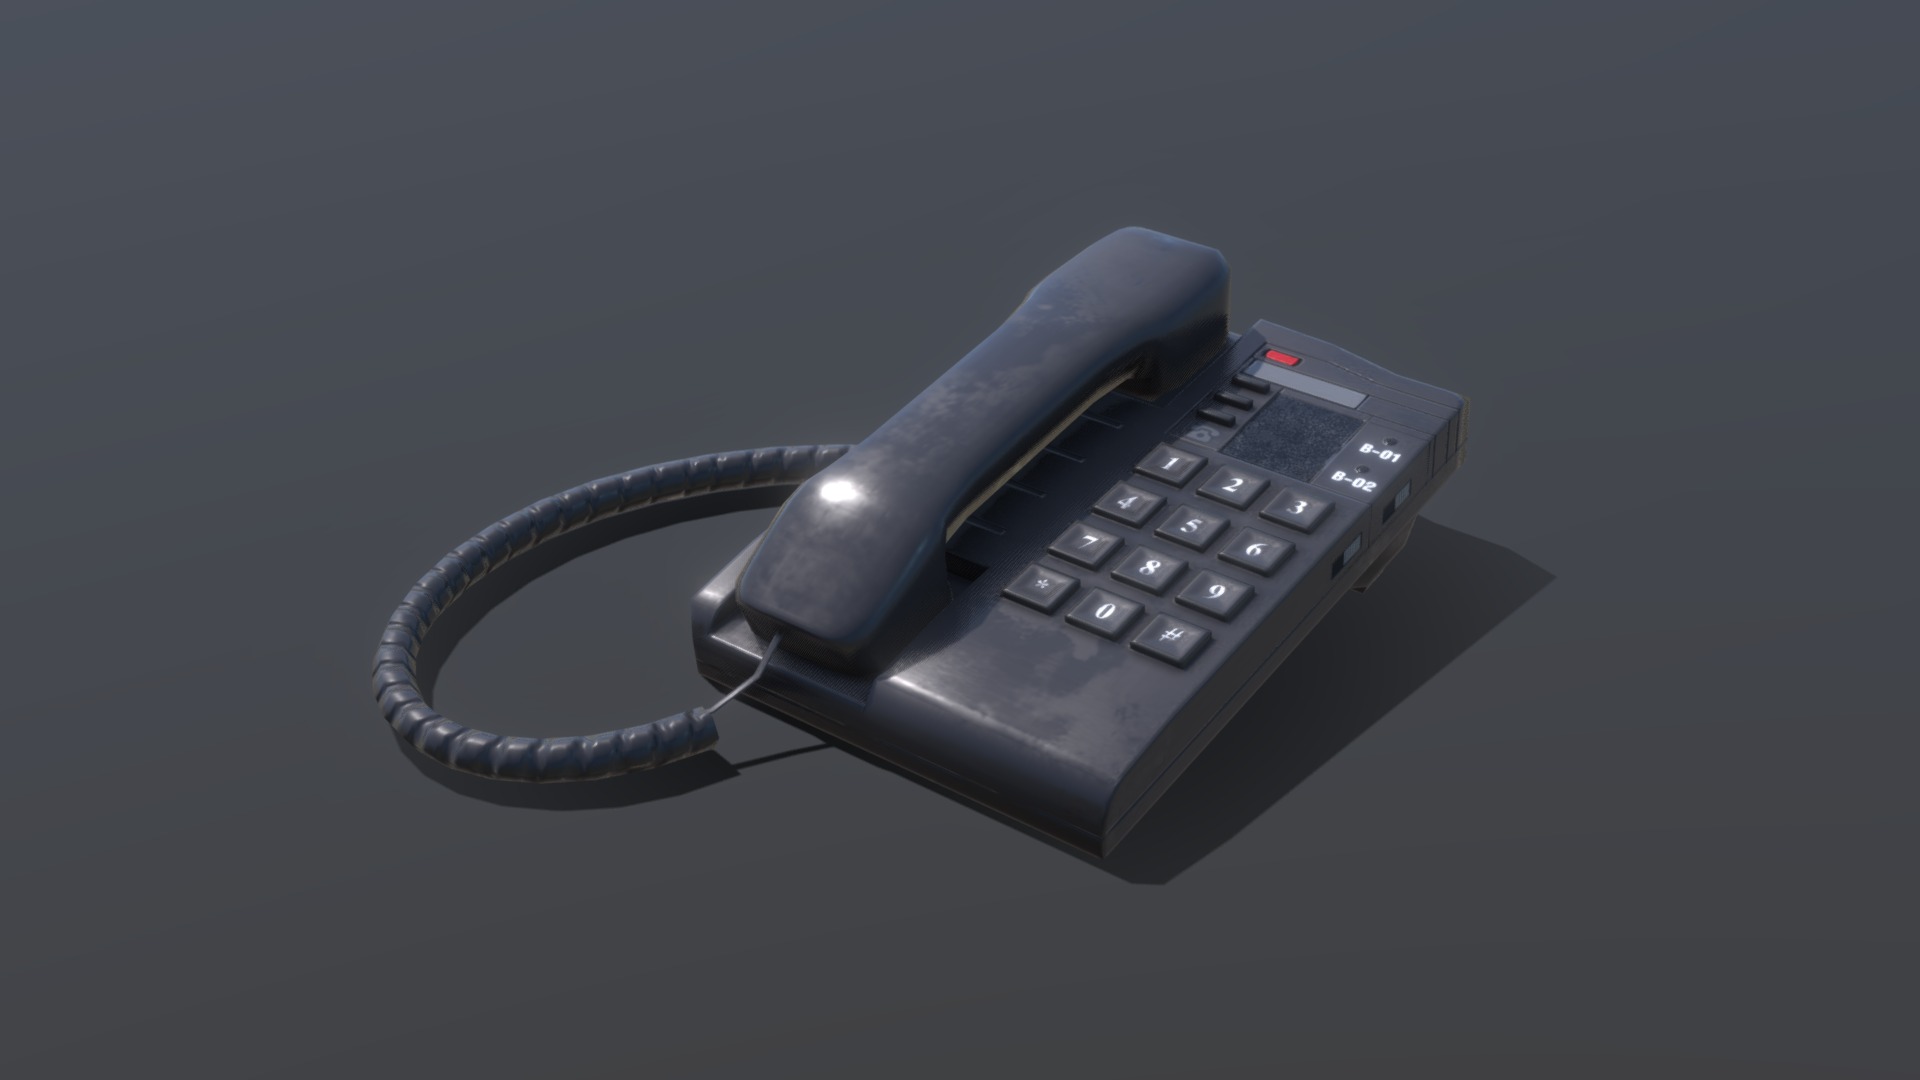 3D model Dirty Phone - This is a 3D model of the Dirty Phone. The 3D model is about a telephone on a table.